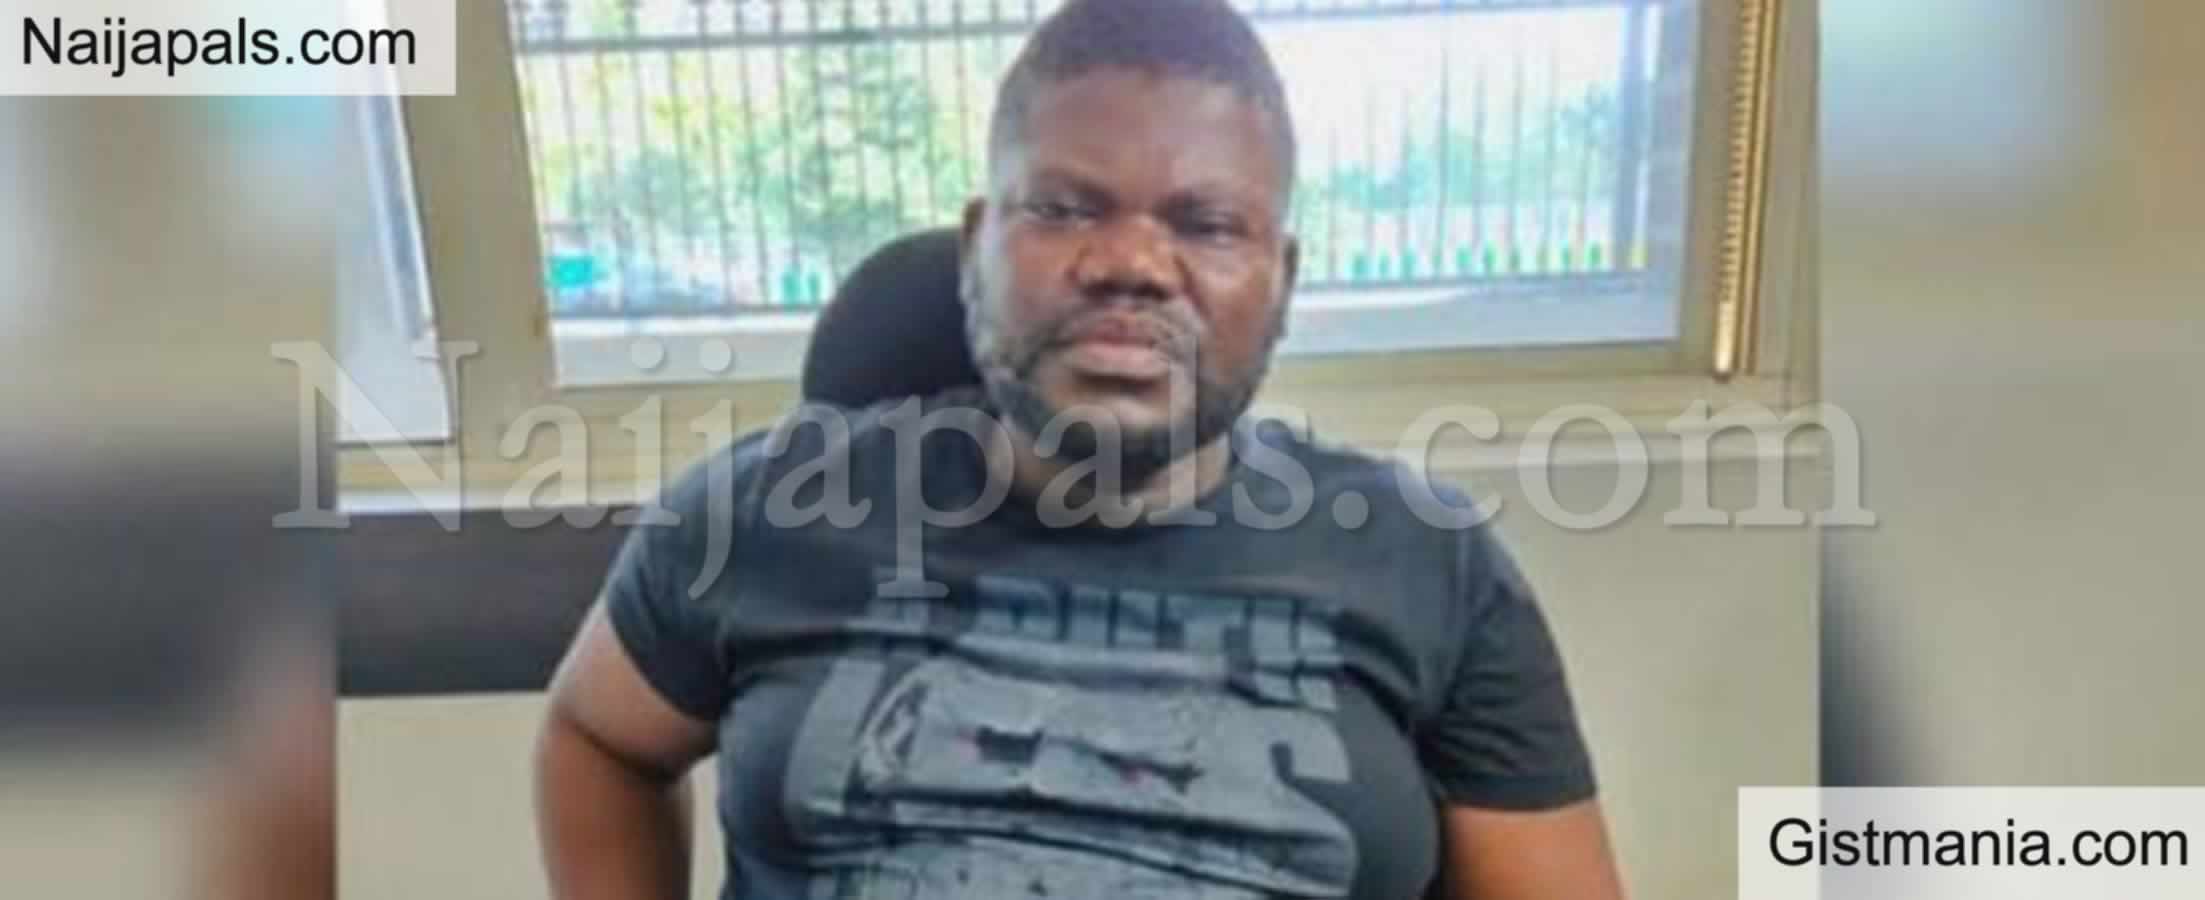 <img alt='.' class='lazyload' data-src='https://img.gistmania.com/emot/comment.gif' /> <b>Nigerian Man, Garuba Galumje Arrested In India For Duping 300 Women On Pretext Of Marriage</b>